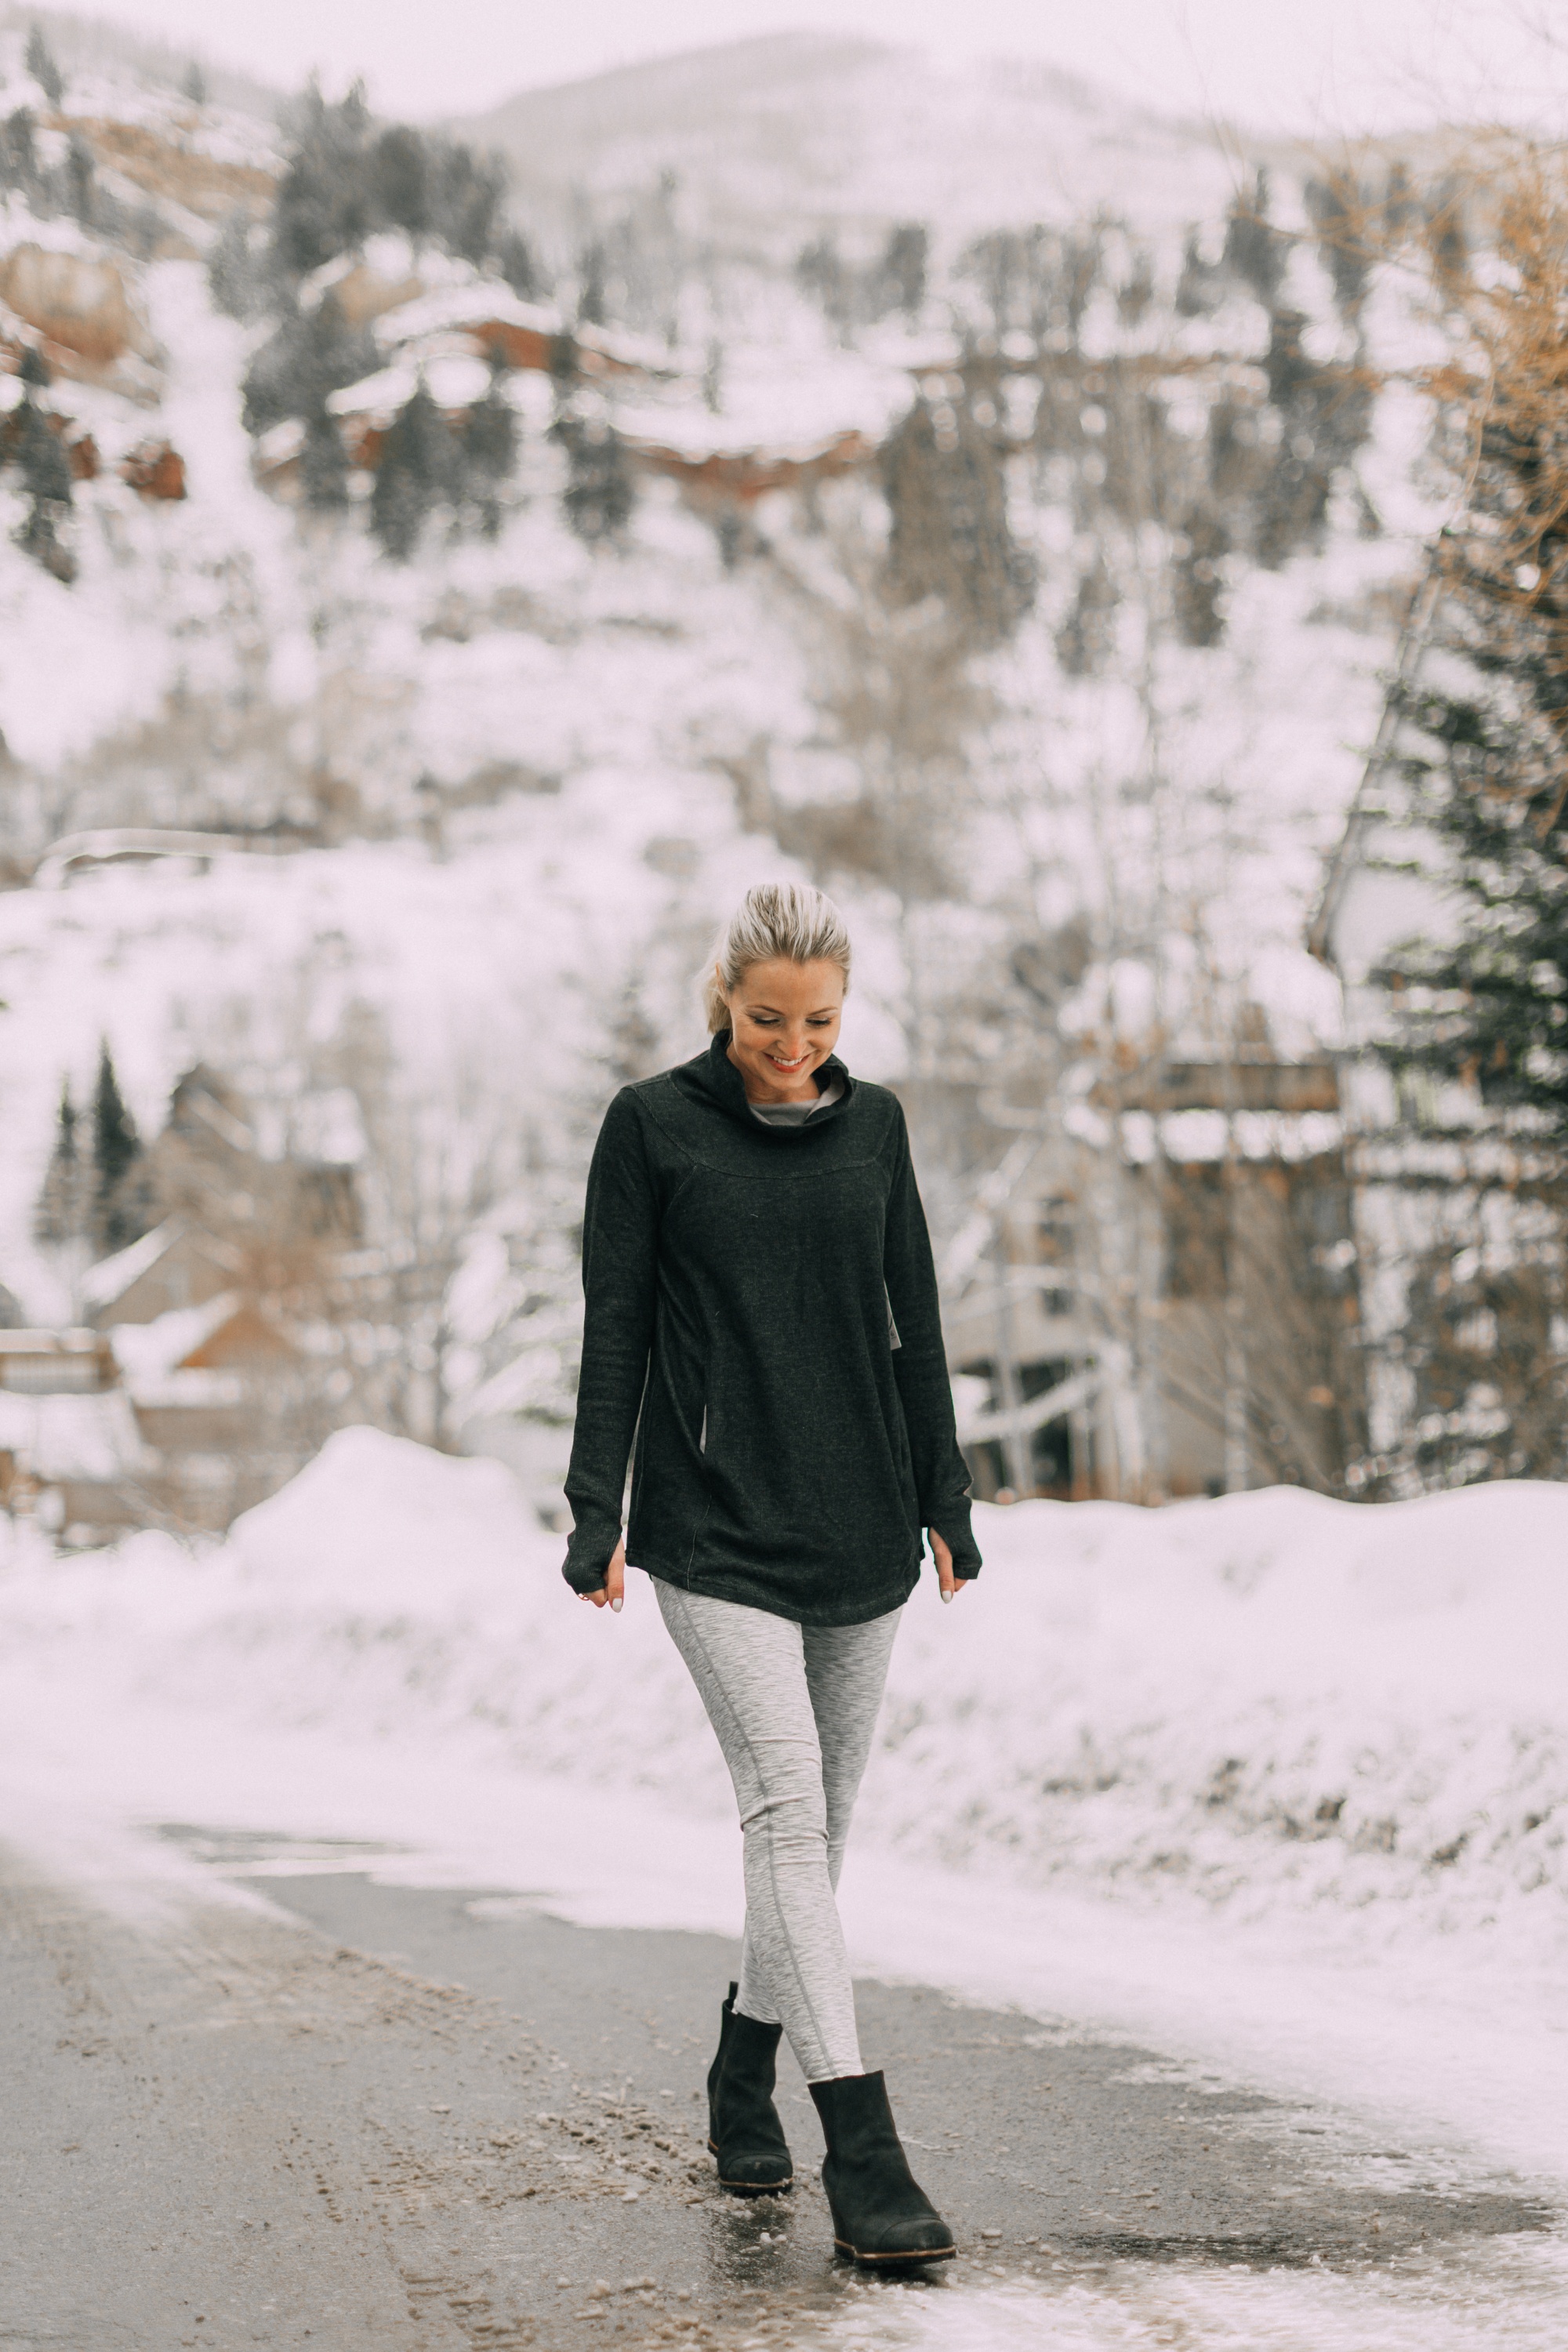 Reversible Leggings, Fashion blogger erin busbee of busbeestyle.com wearing the reversible printed leggings and funnel neck tunic from Jockey in Telluride, CO